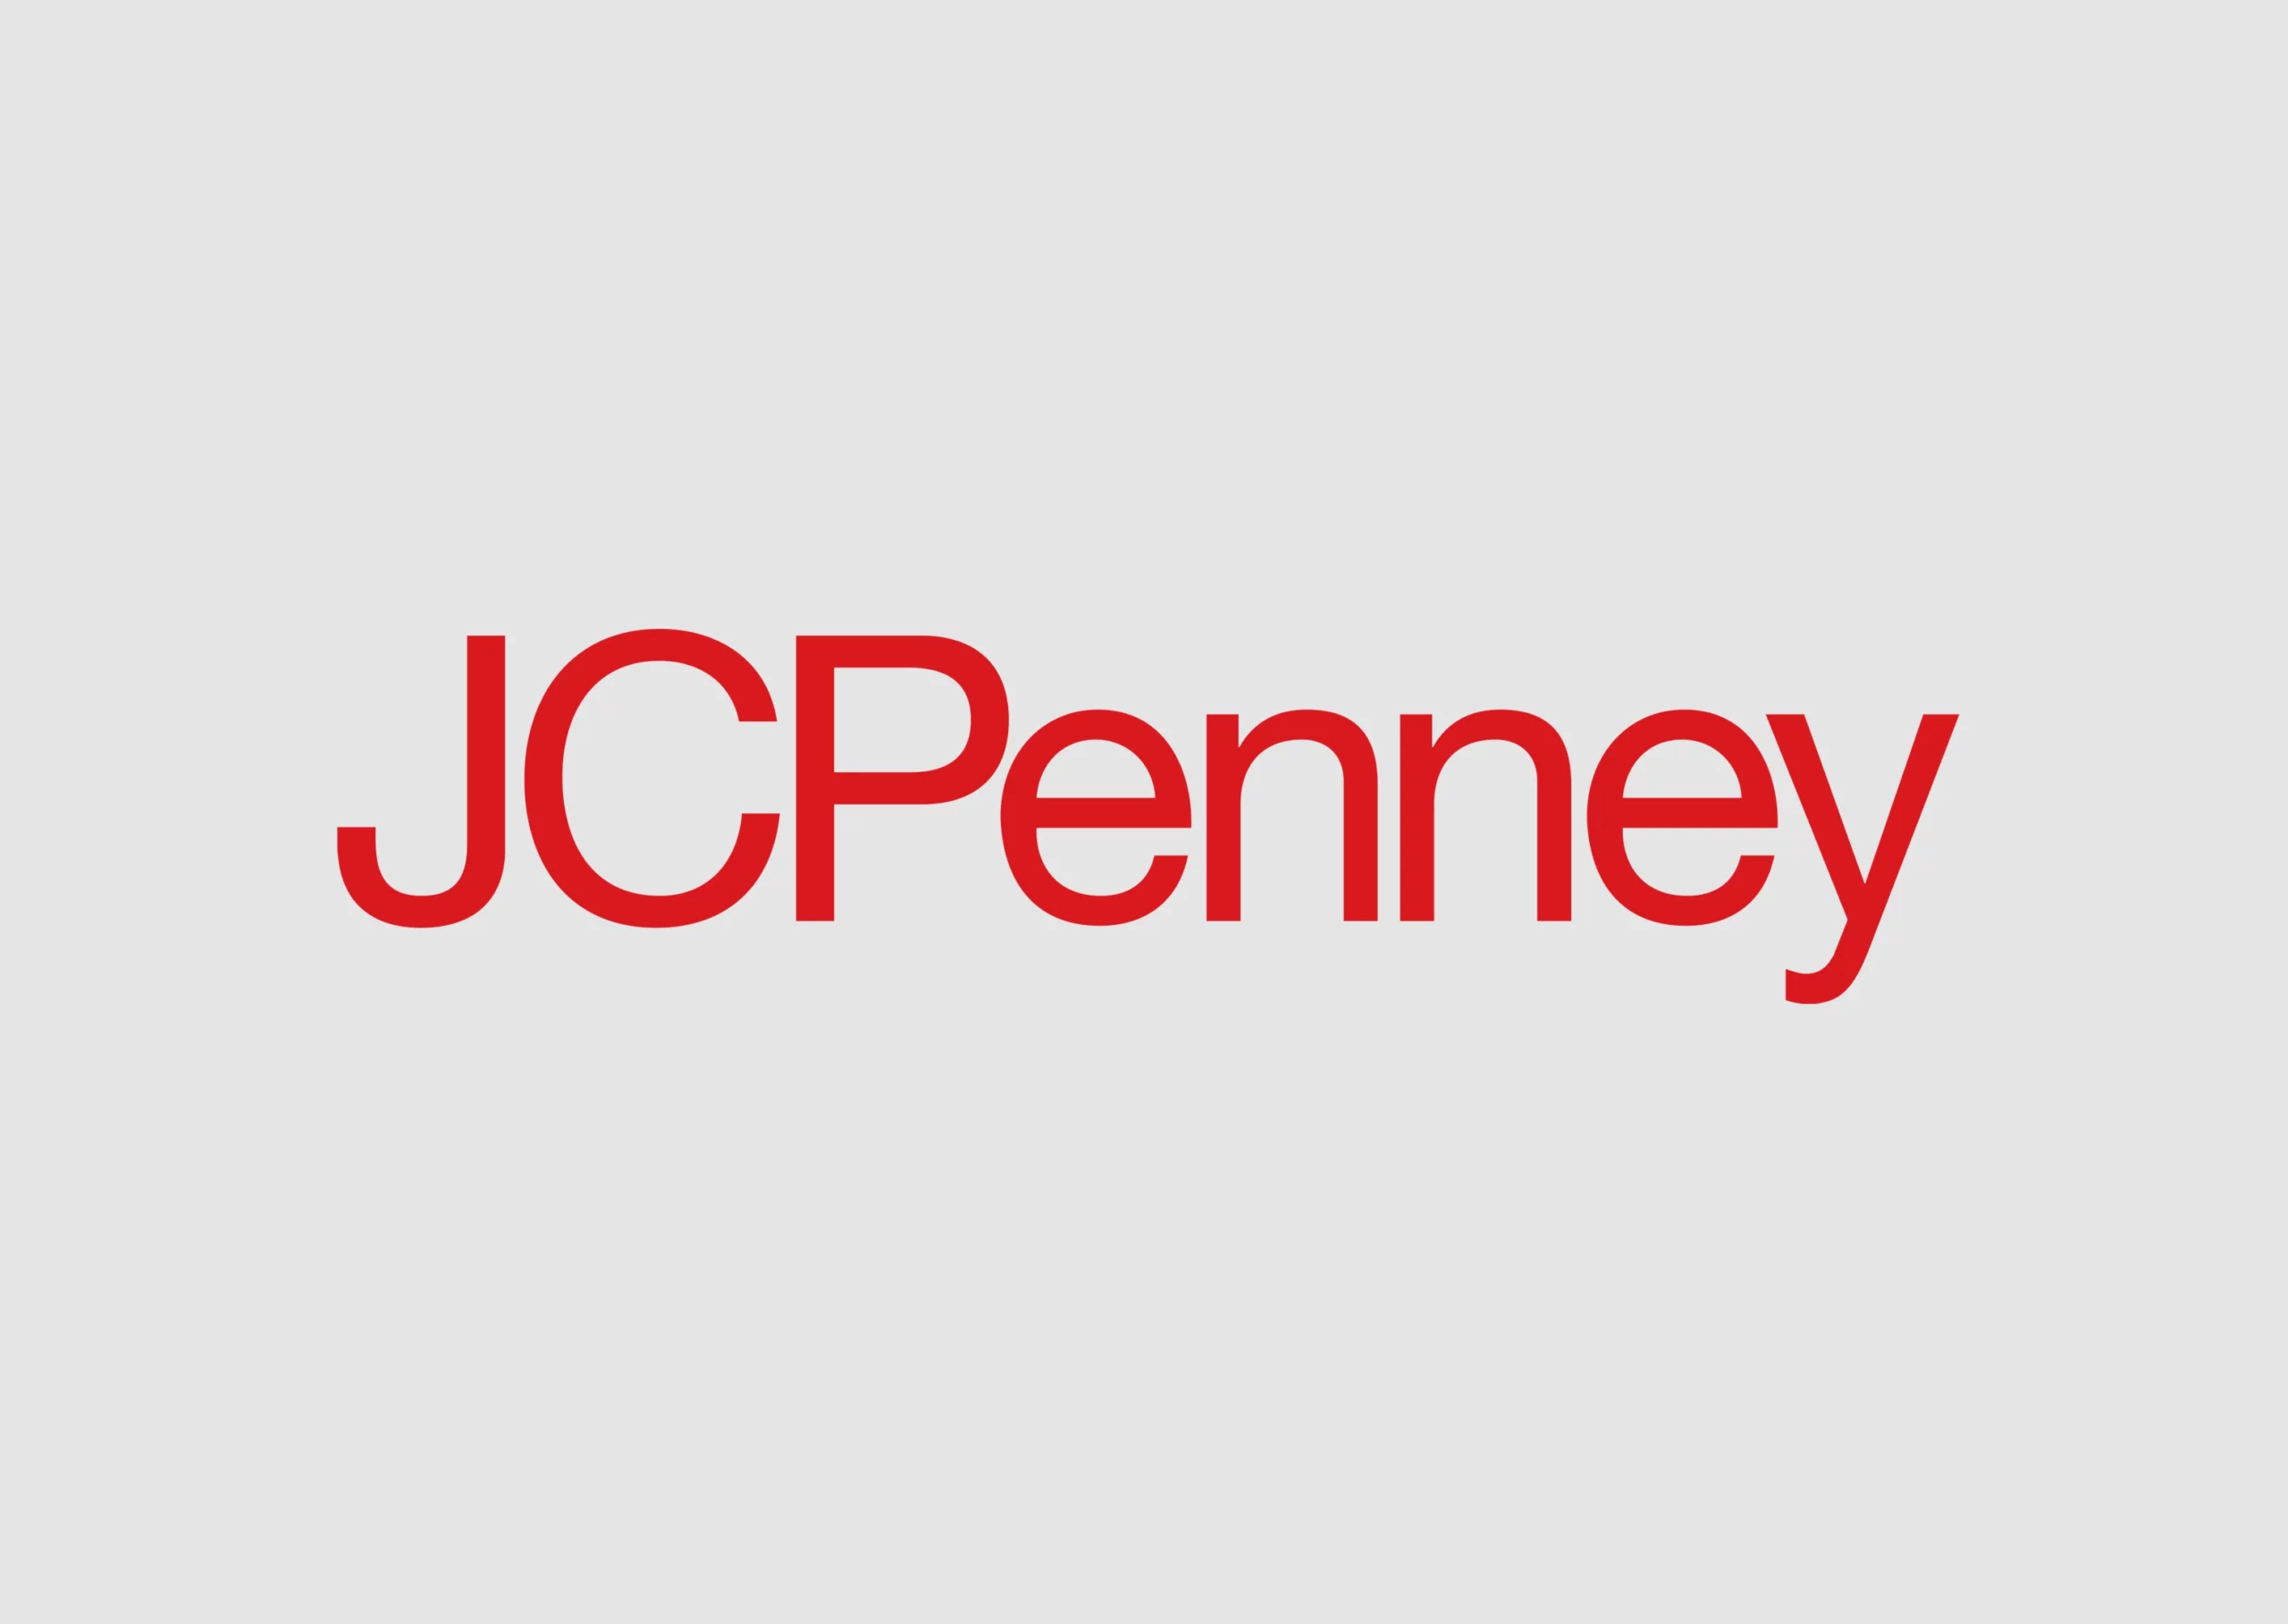 JCpenny